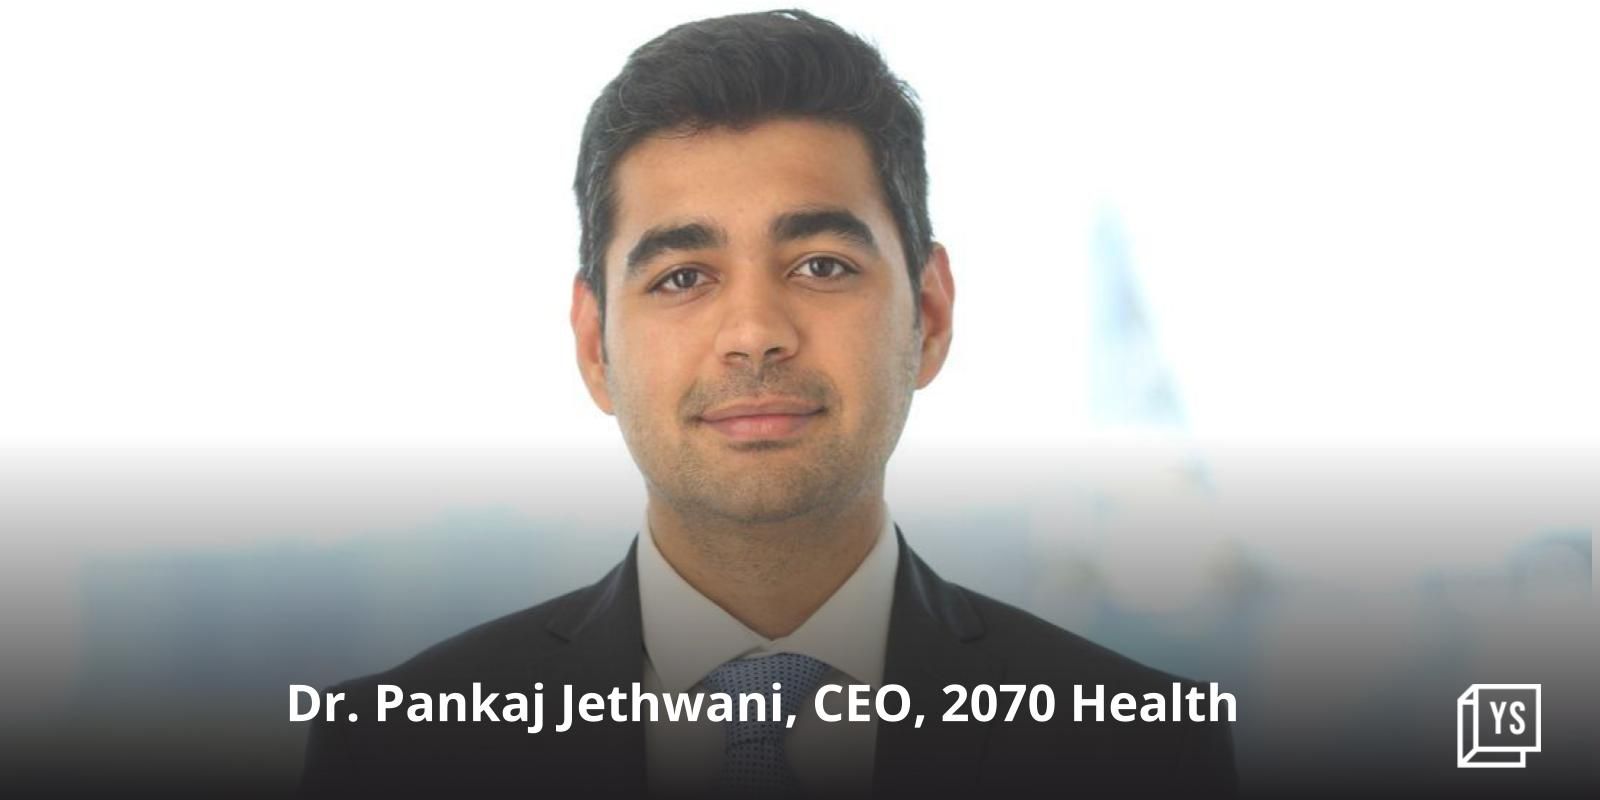 Mumbai-based 2070 Health is looking to build the next Ola and Swiggy of healthtech